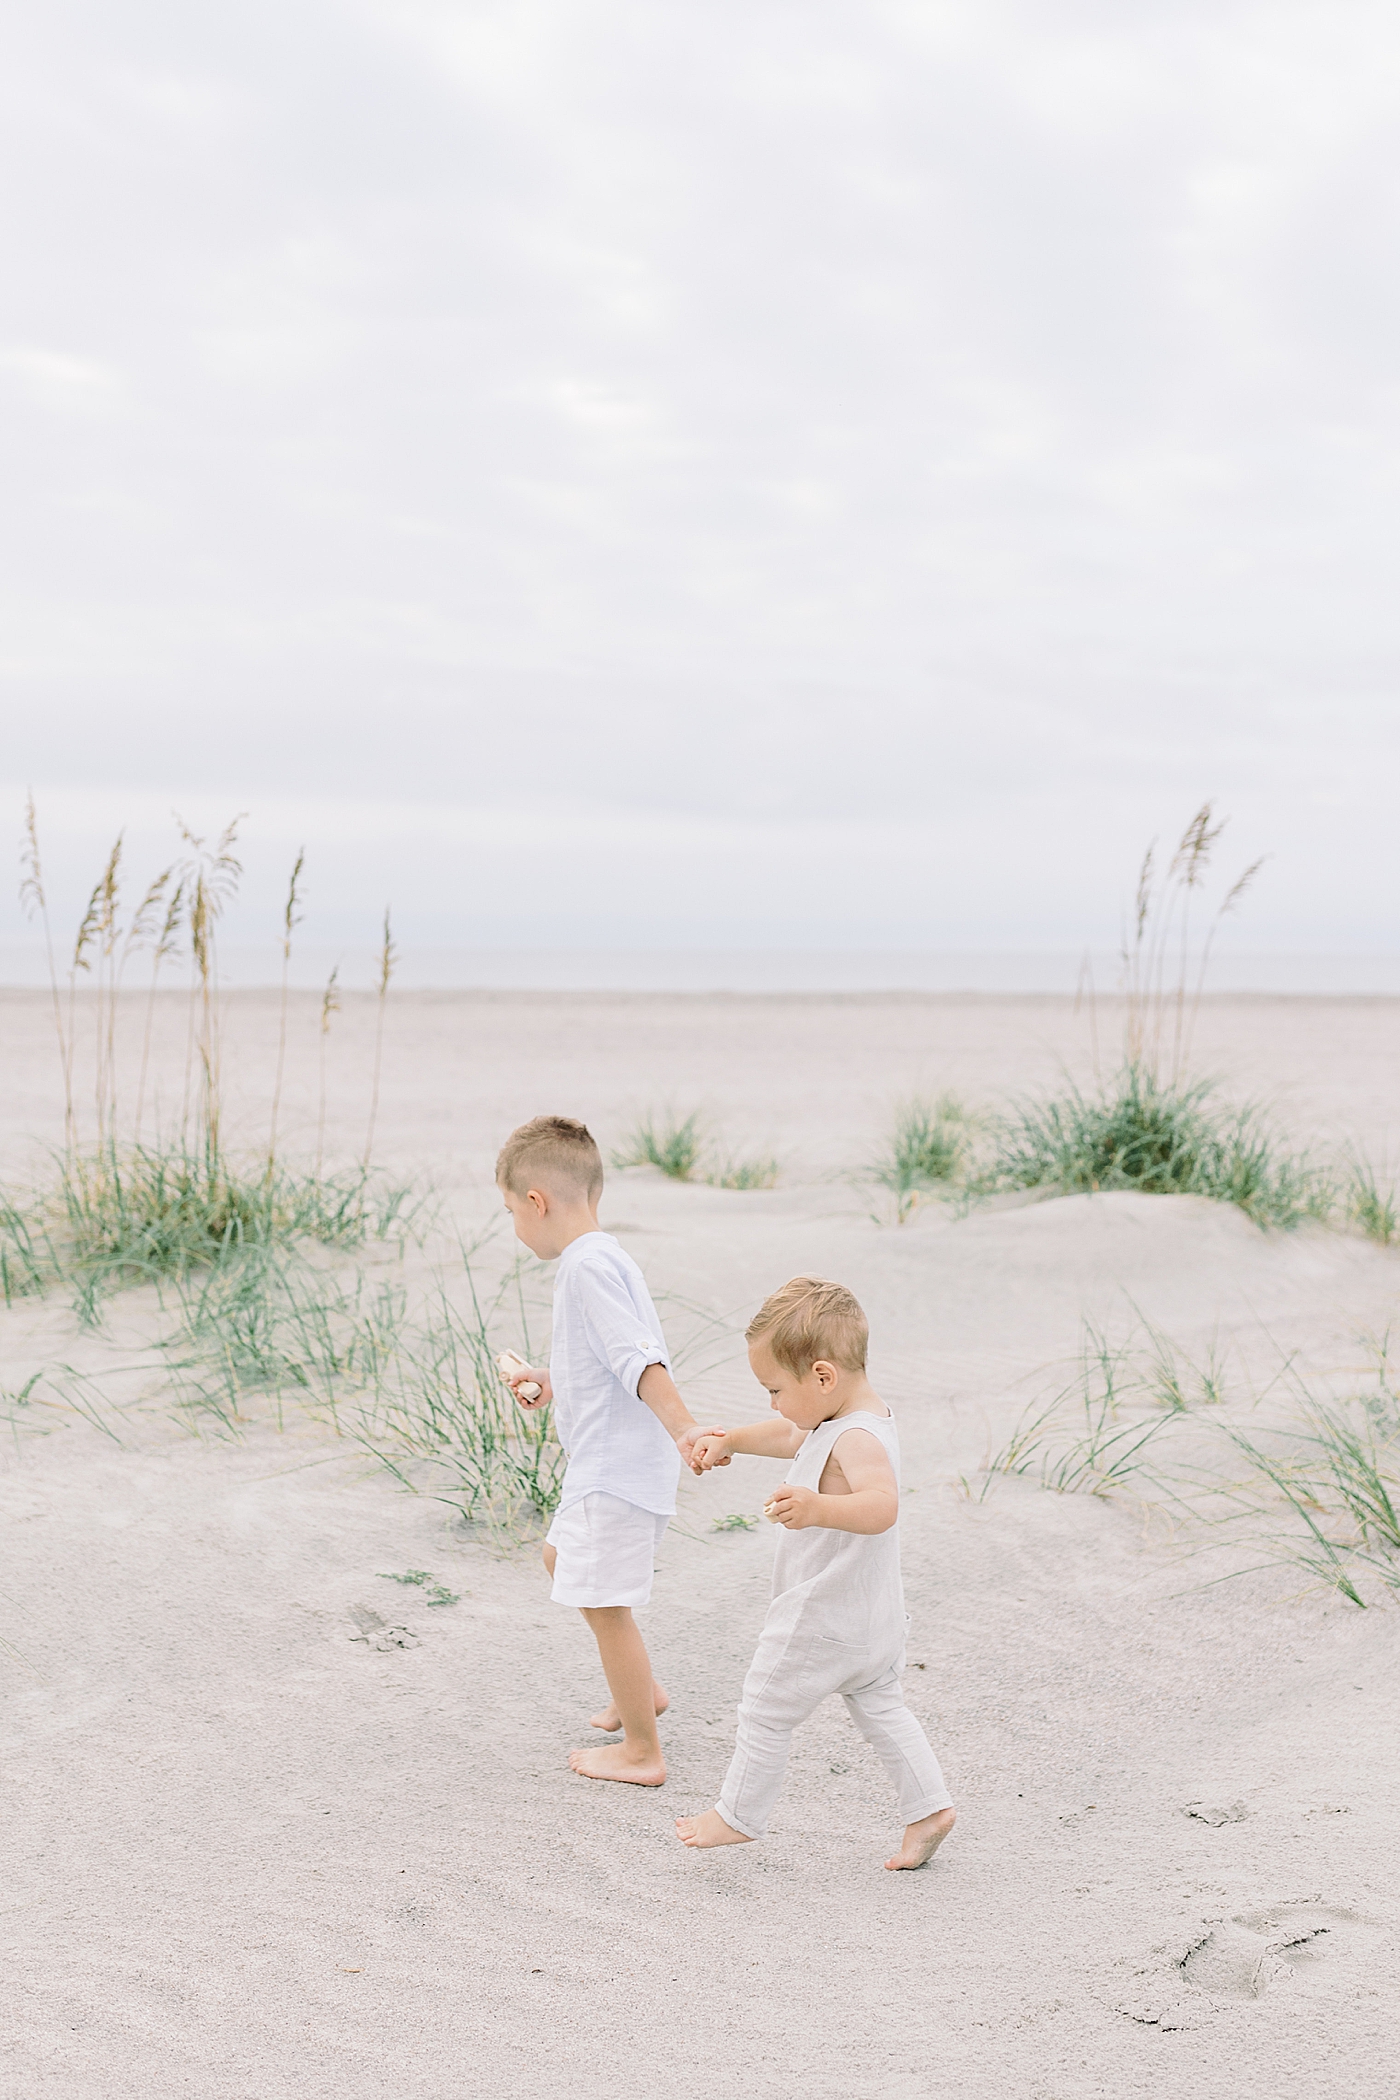 Toddler brothers walking on the beach | Image by Caitlyn Motycka